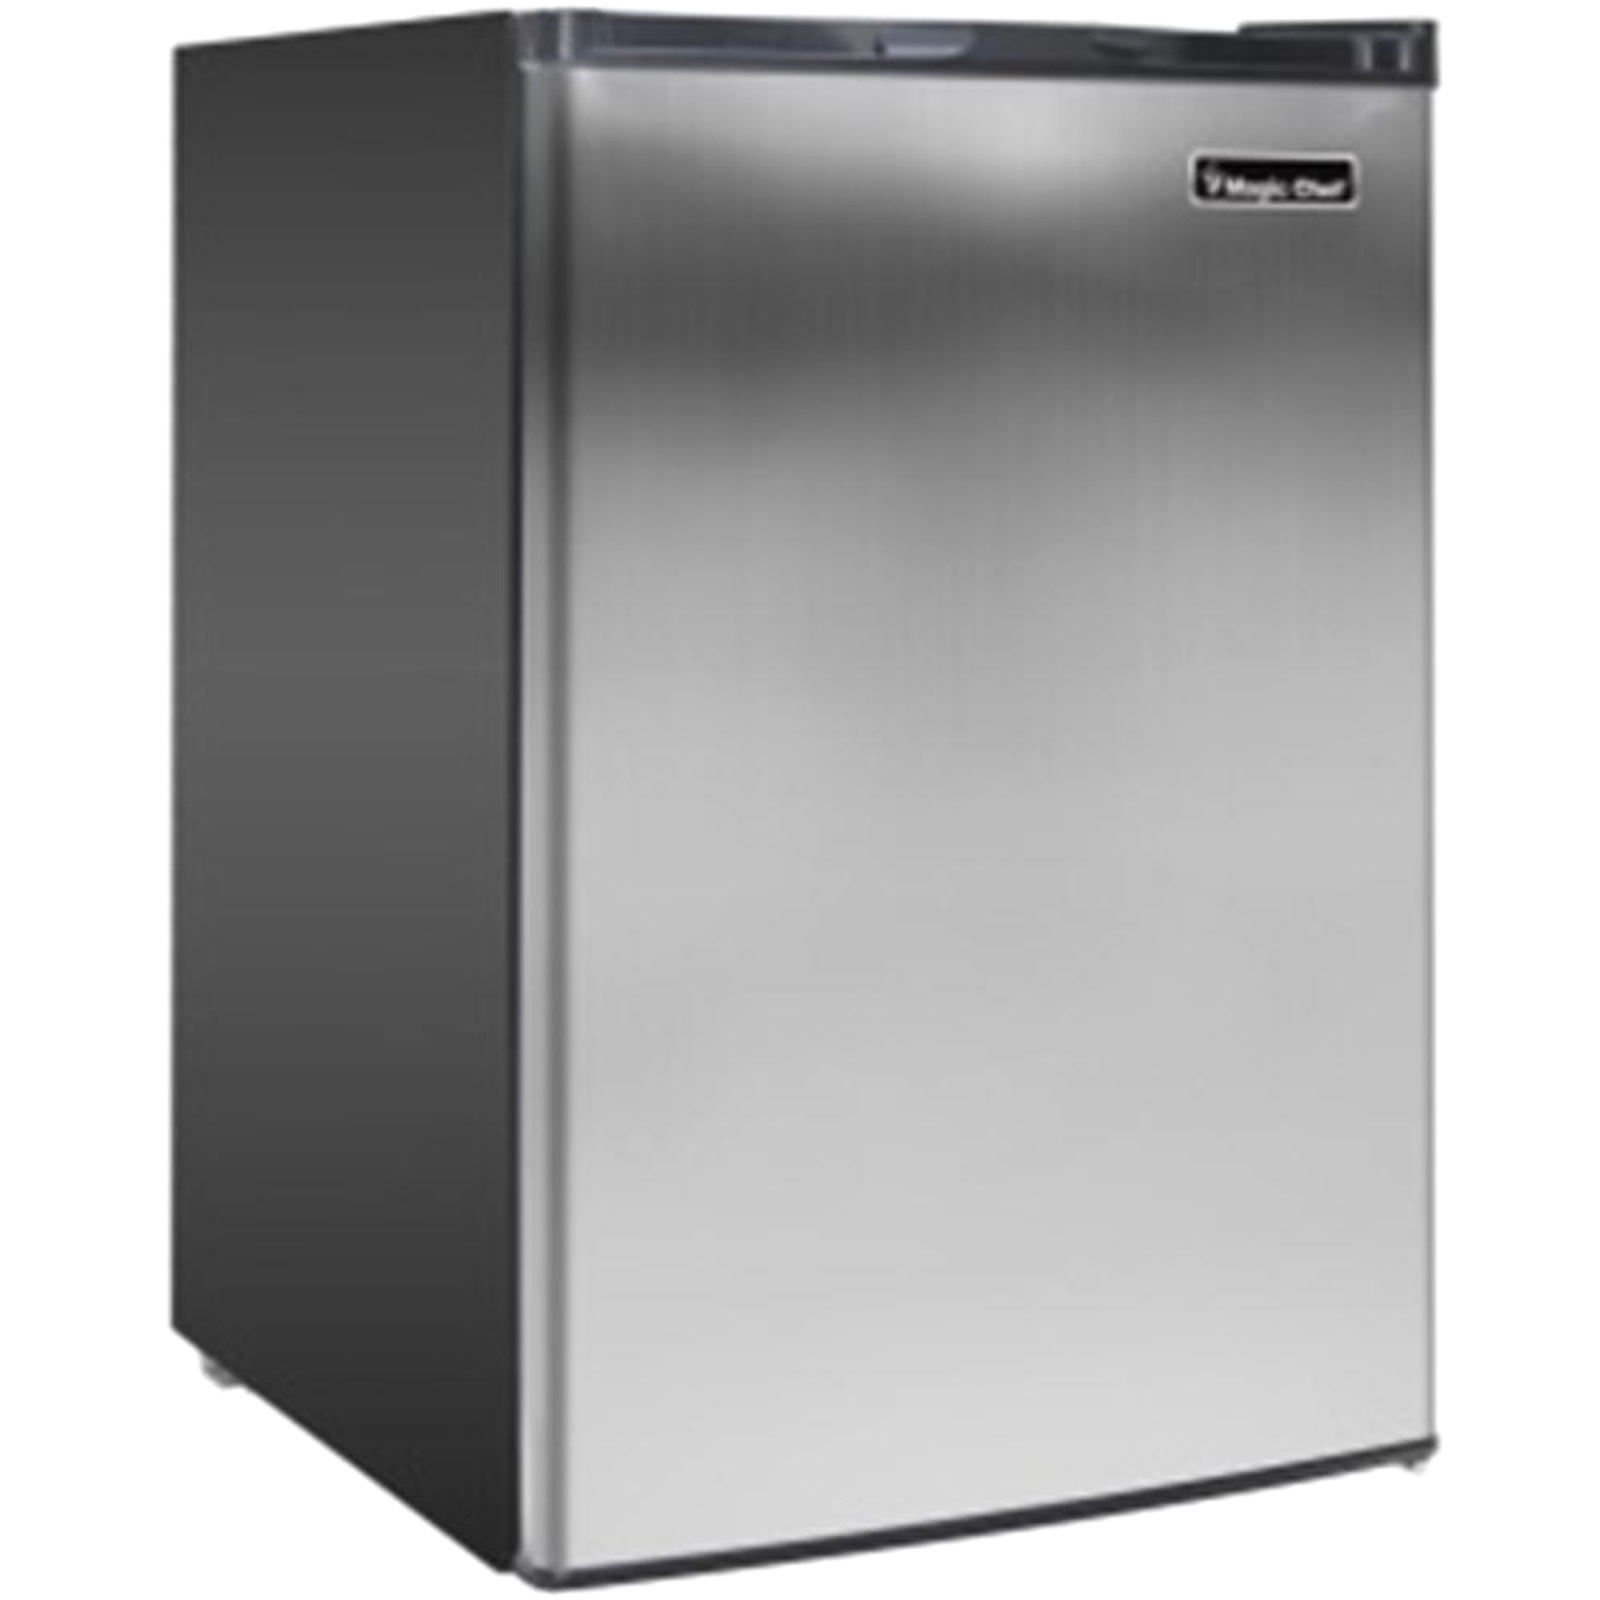 Magic Chef MCUF3S2  3.0cu.ft. Upright Freezer - Stainless Steel